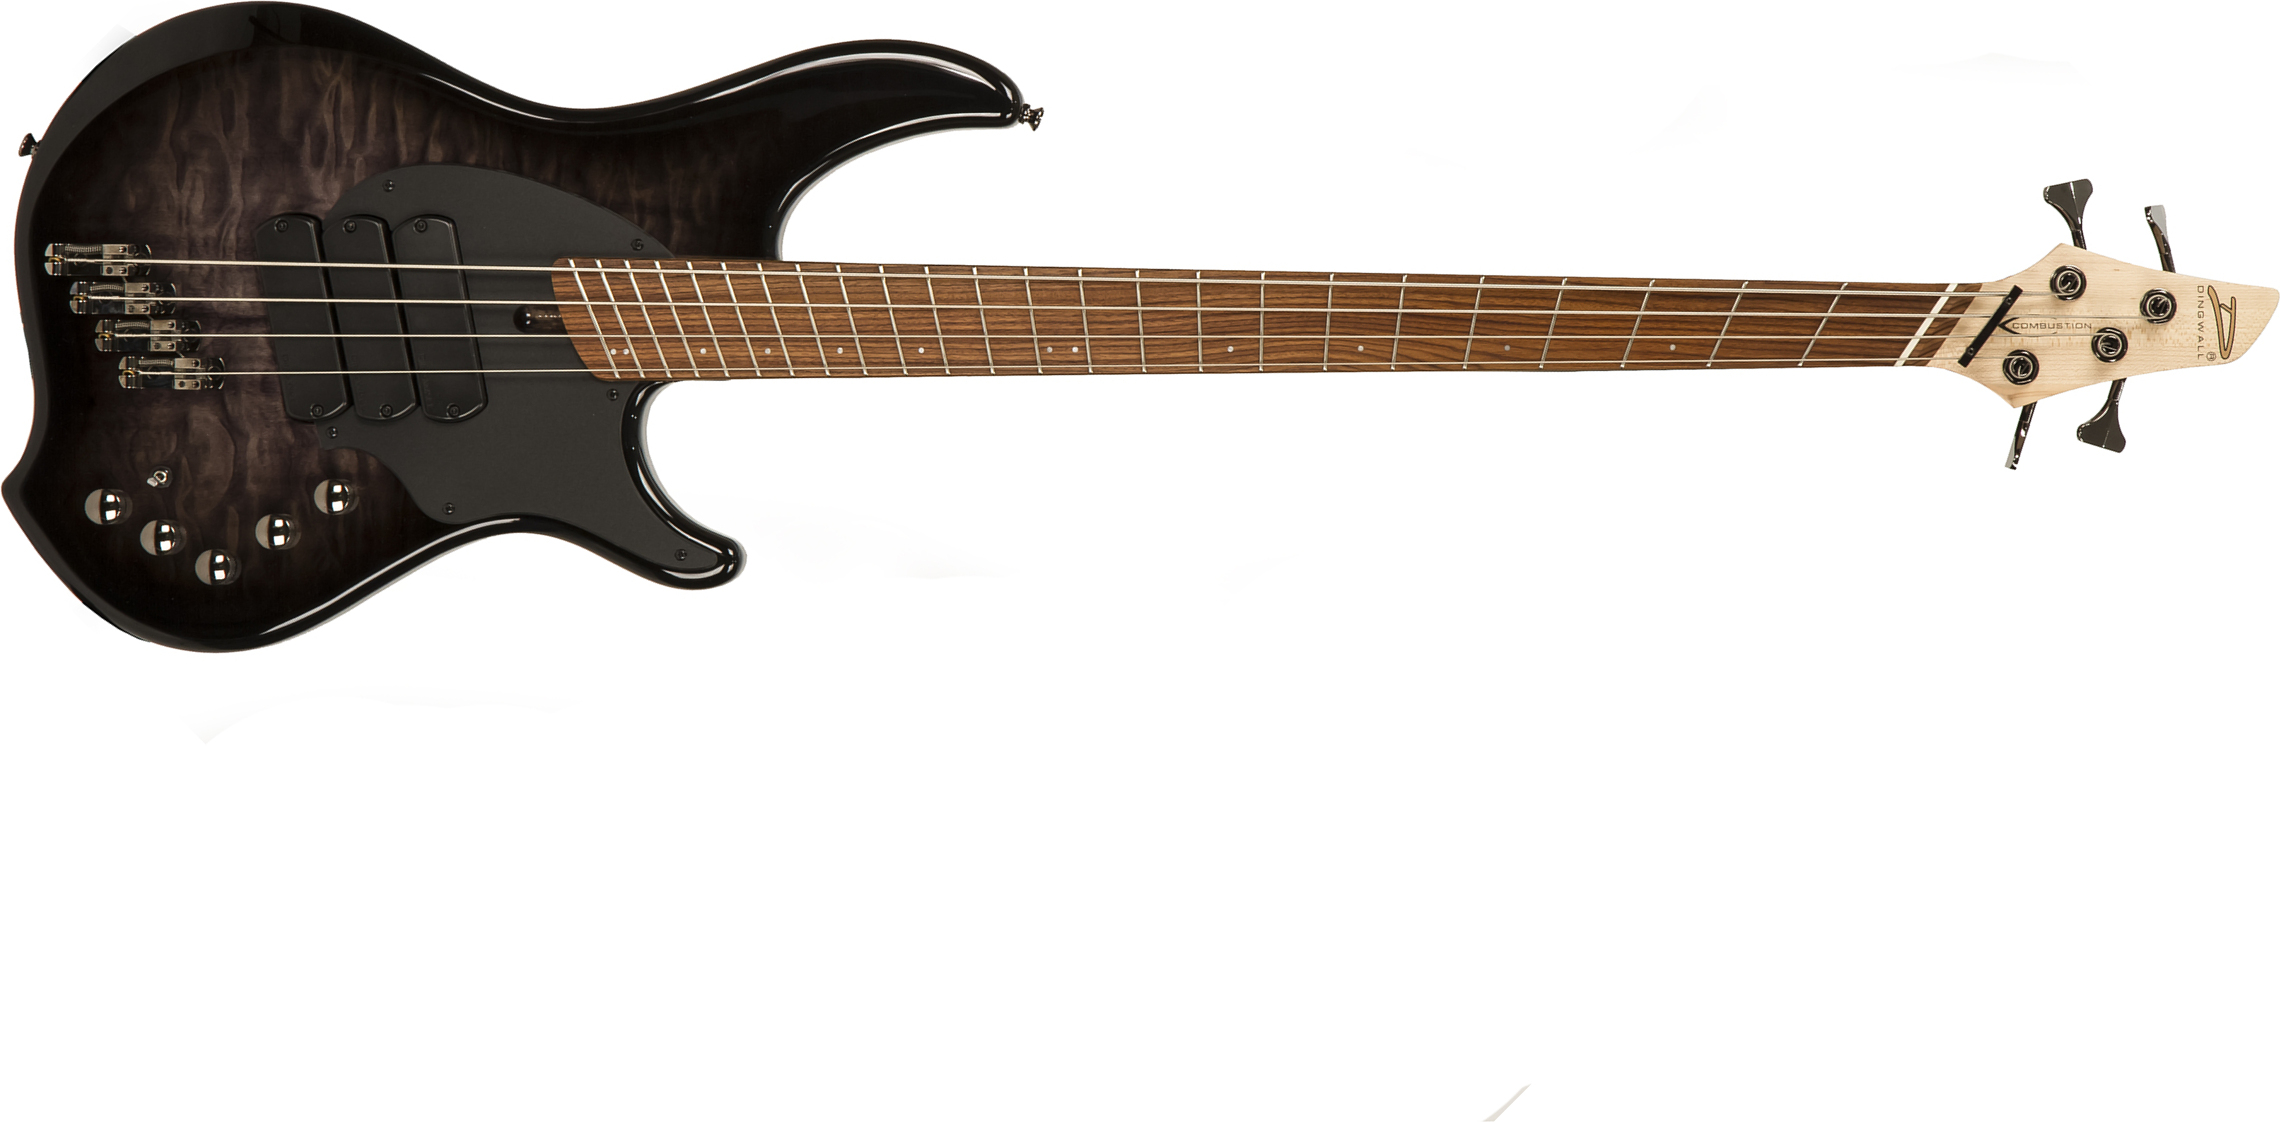 Dingwall Combustion Cb3 4c 3pu Active Mn - Black Burst - Solidbody E-bass - Main picture